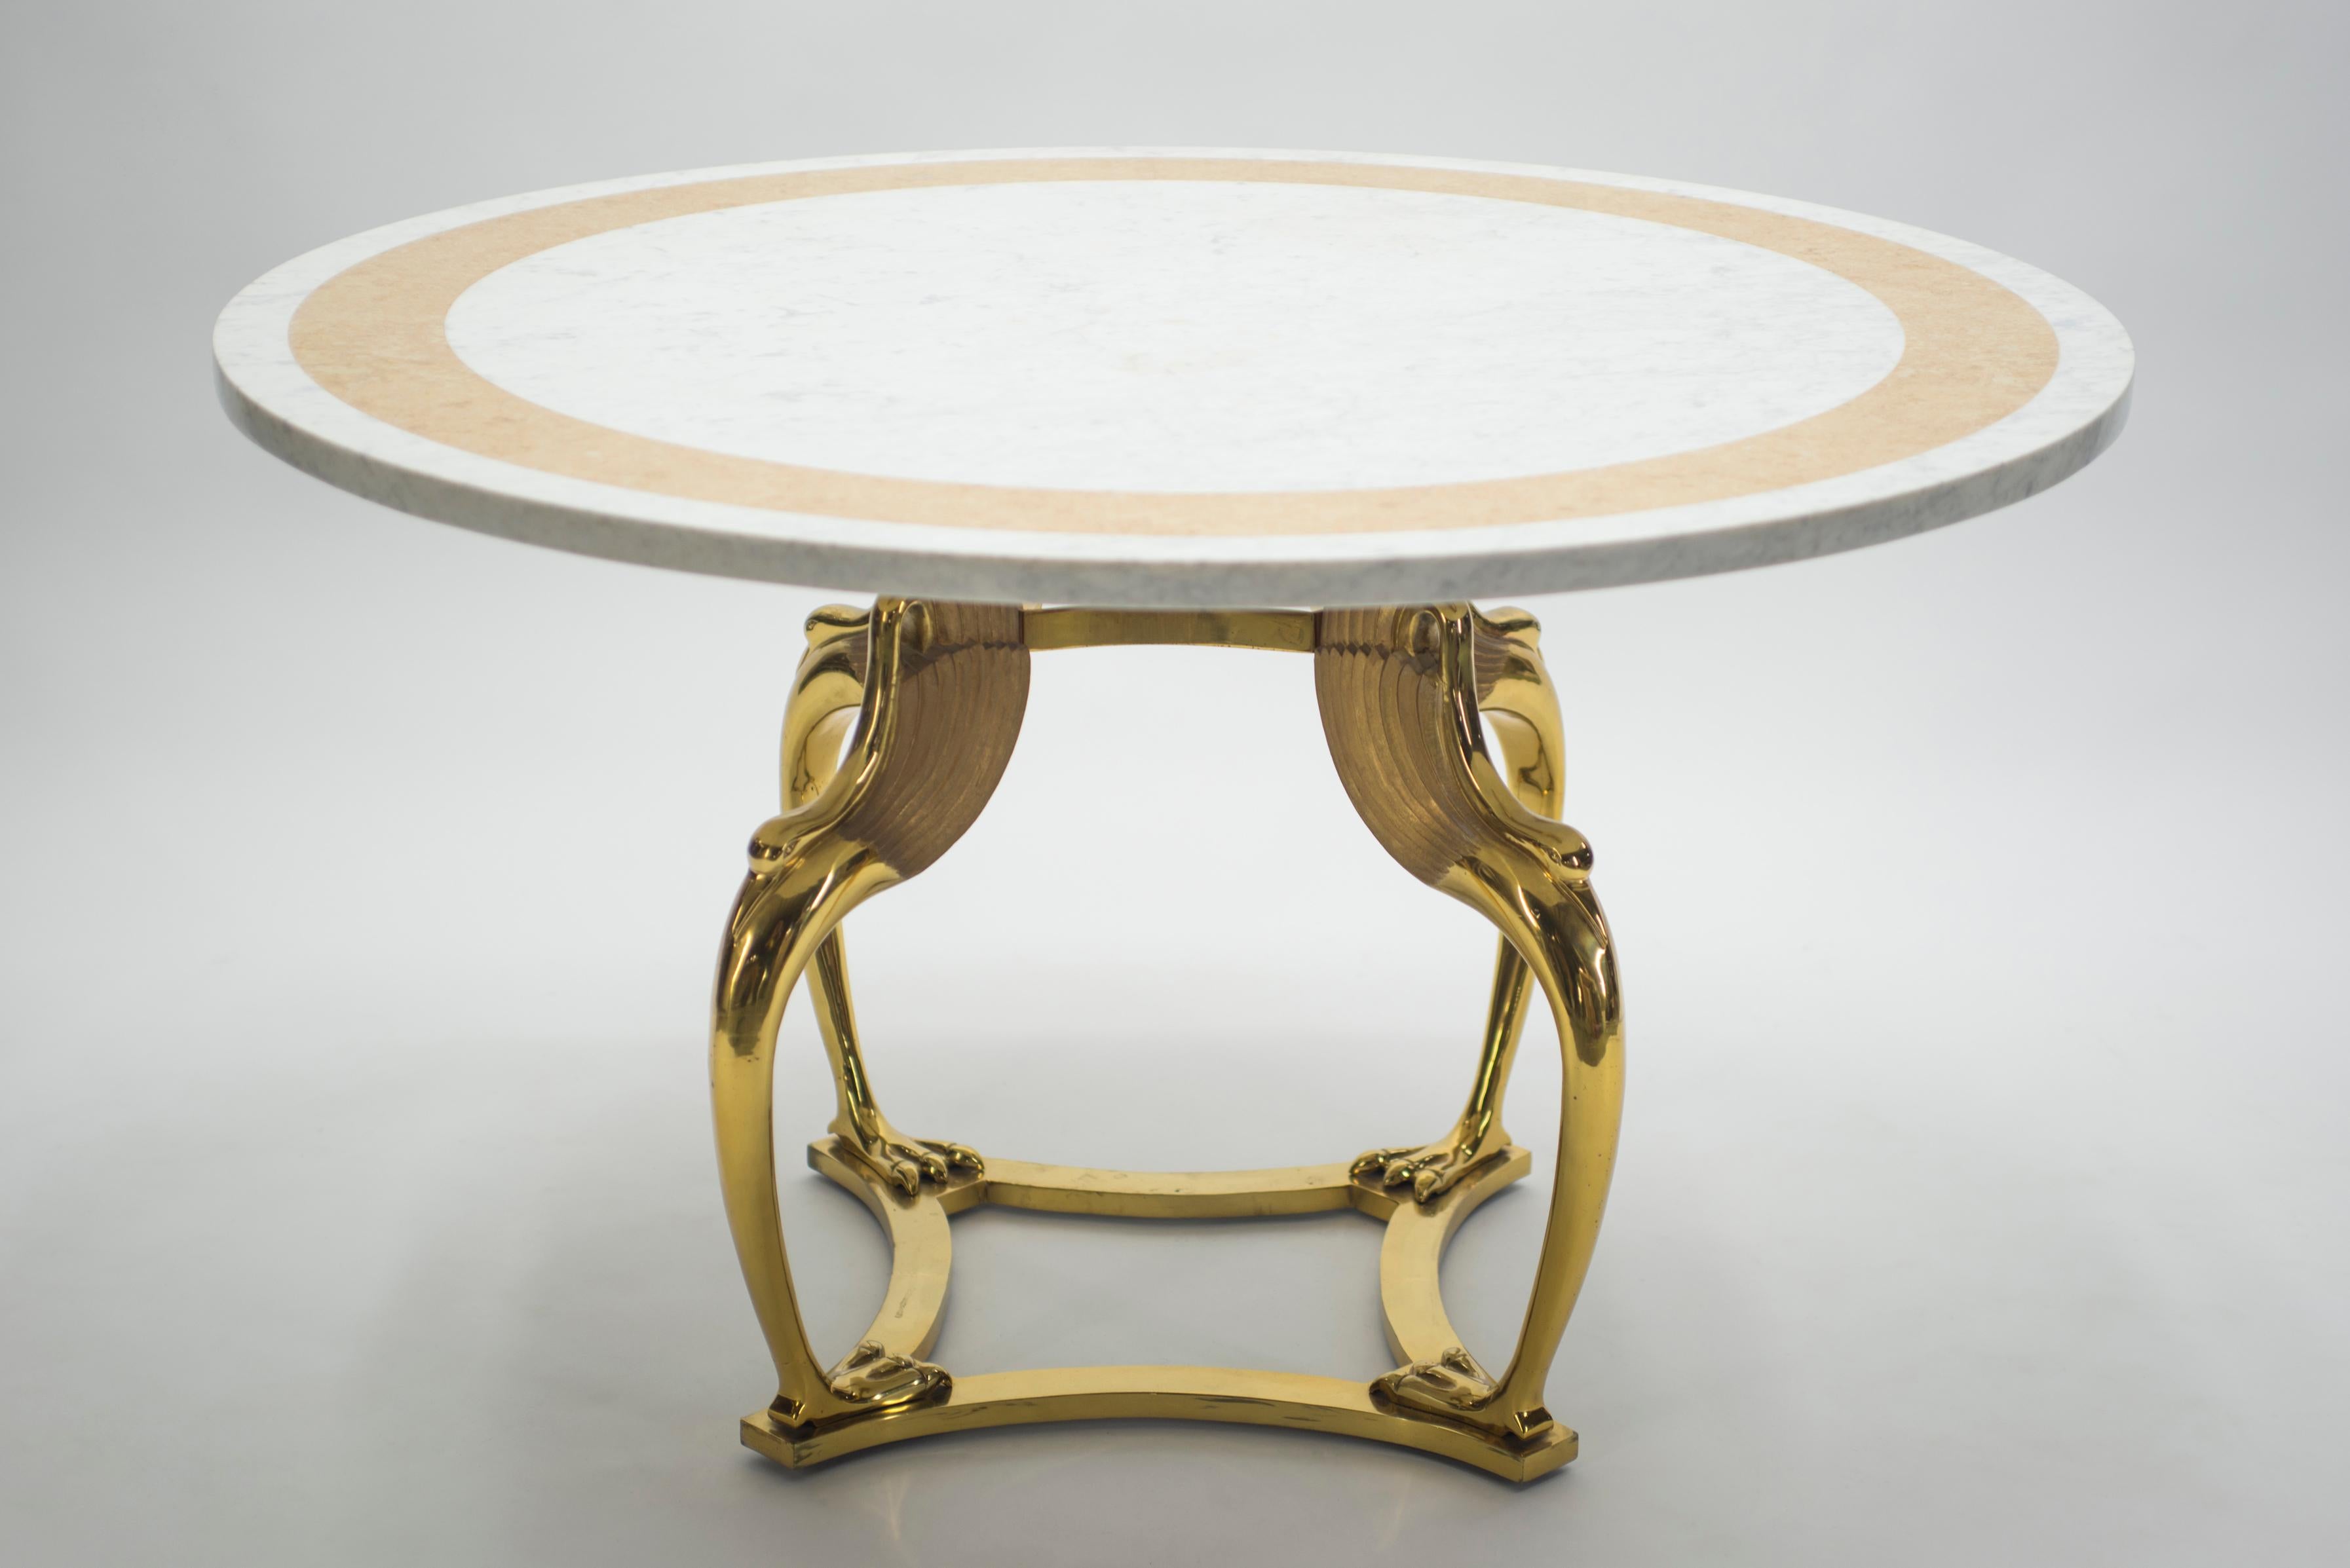 Prominent French designer Robert Thibier seems to have kept some of his most masterful work for himself: This unique dining table, made from solid brass and white marble, was his personal creation, designed specifically to be used in his round